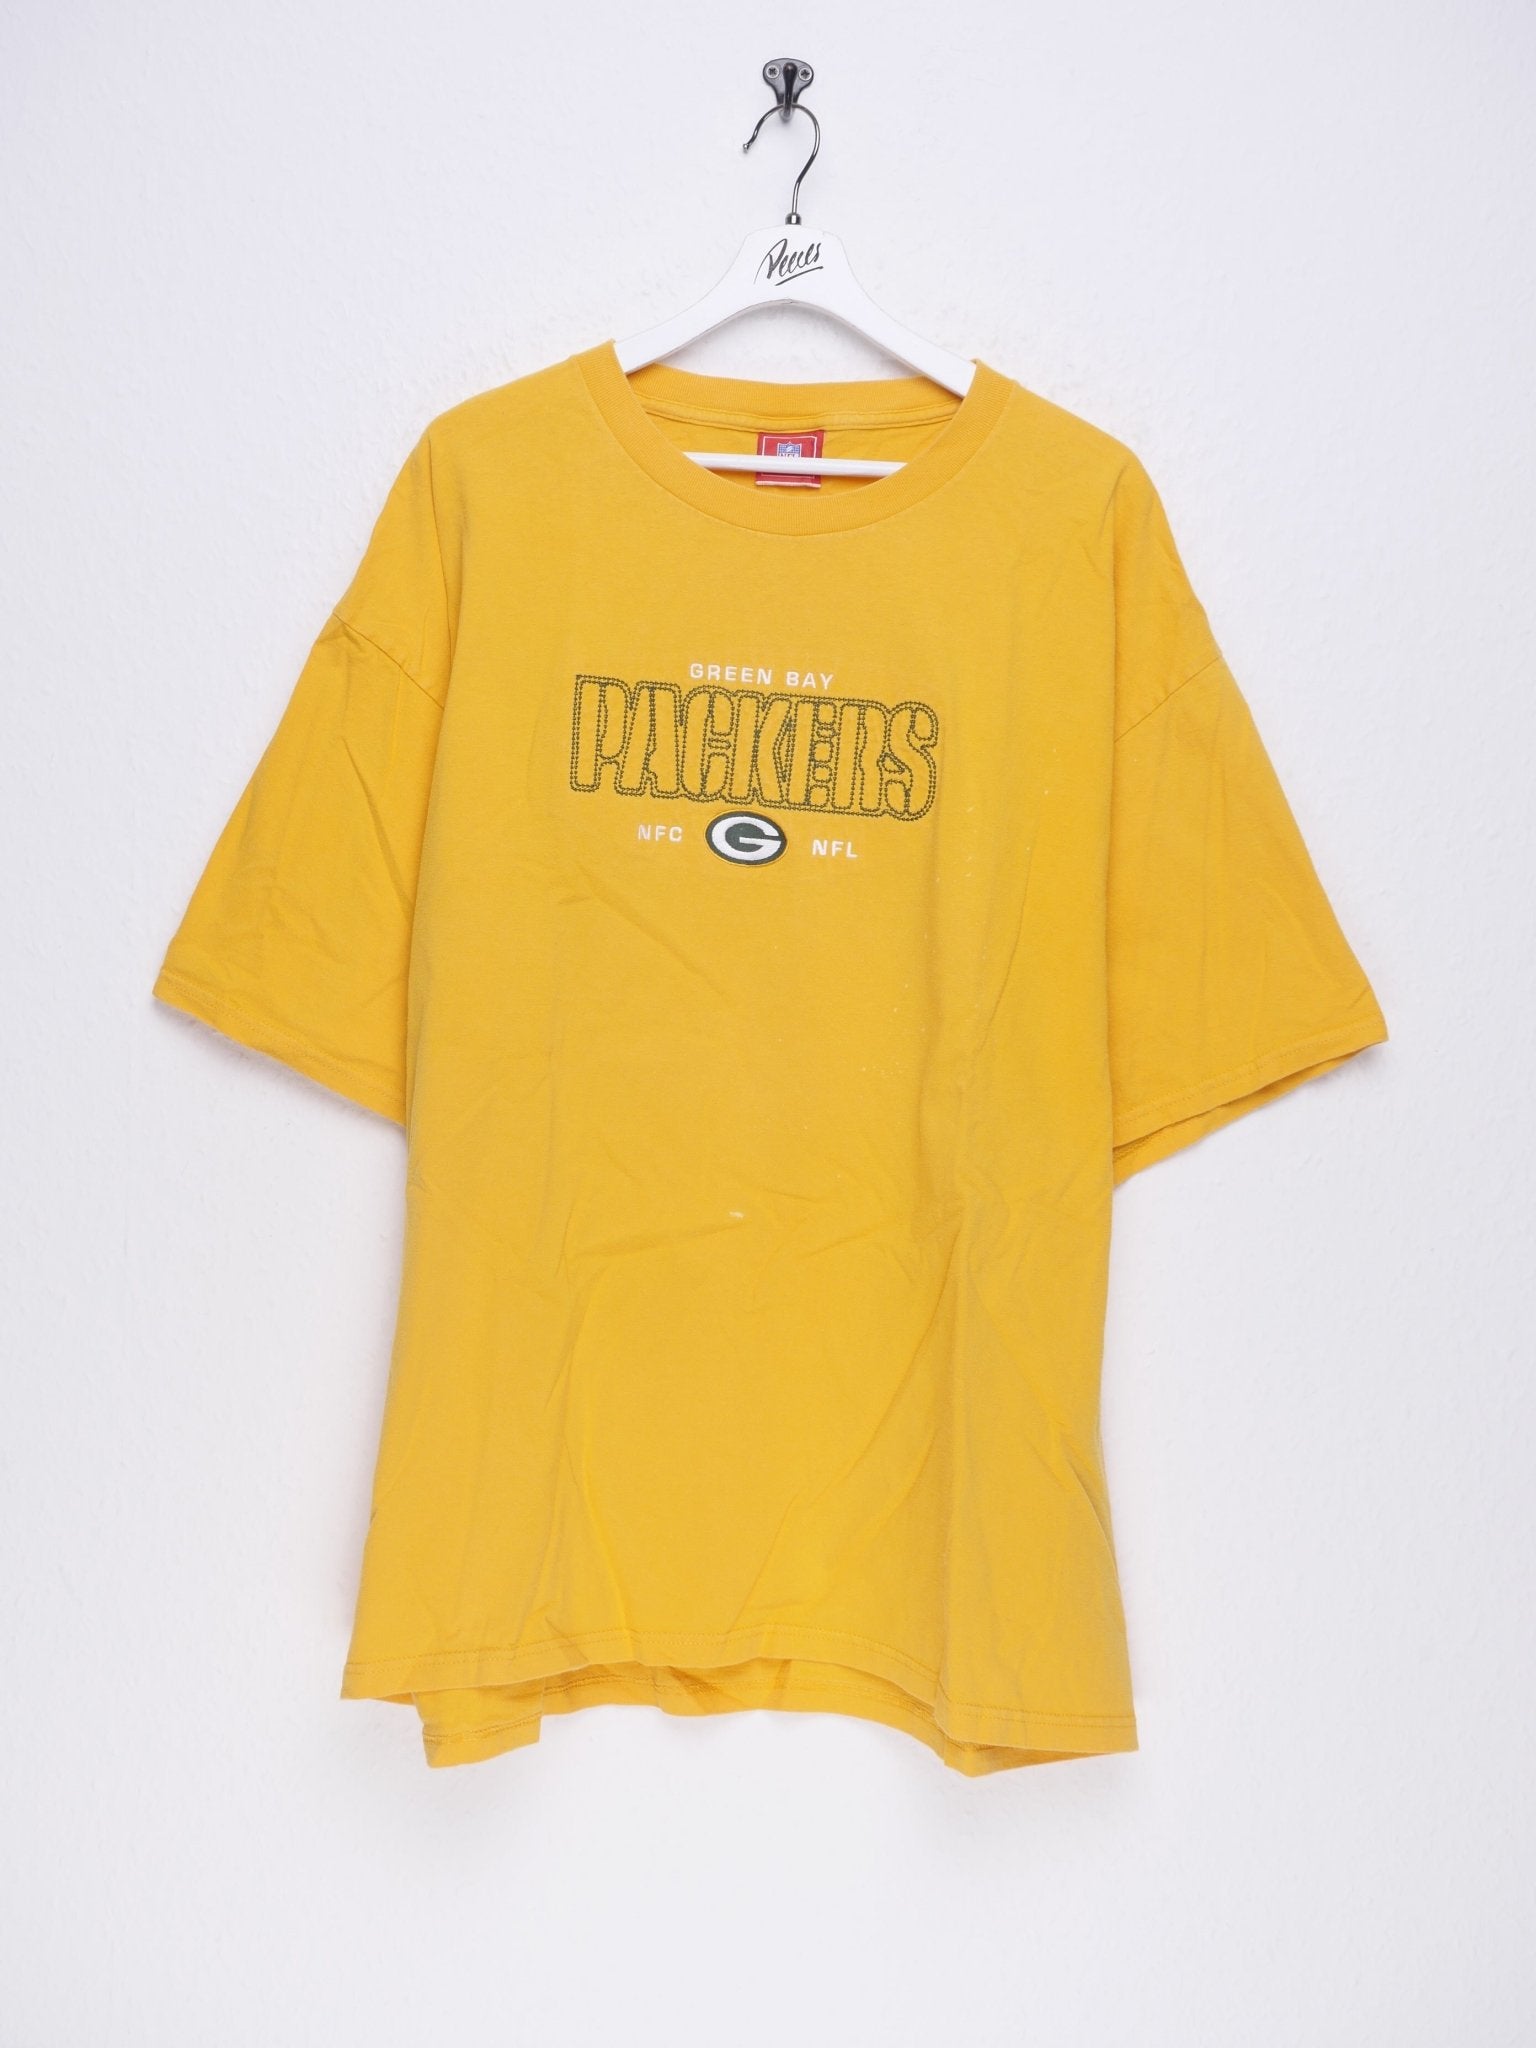 NFL embroidered Packers Spellout Vintage Shirt - Peeces